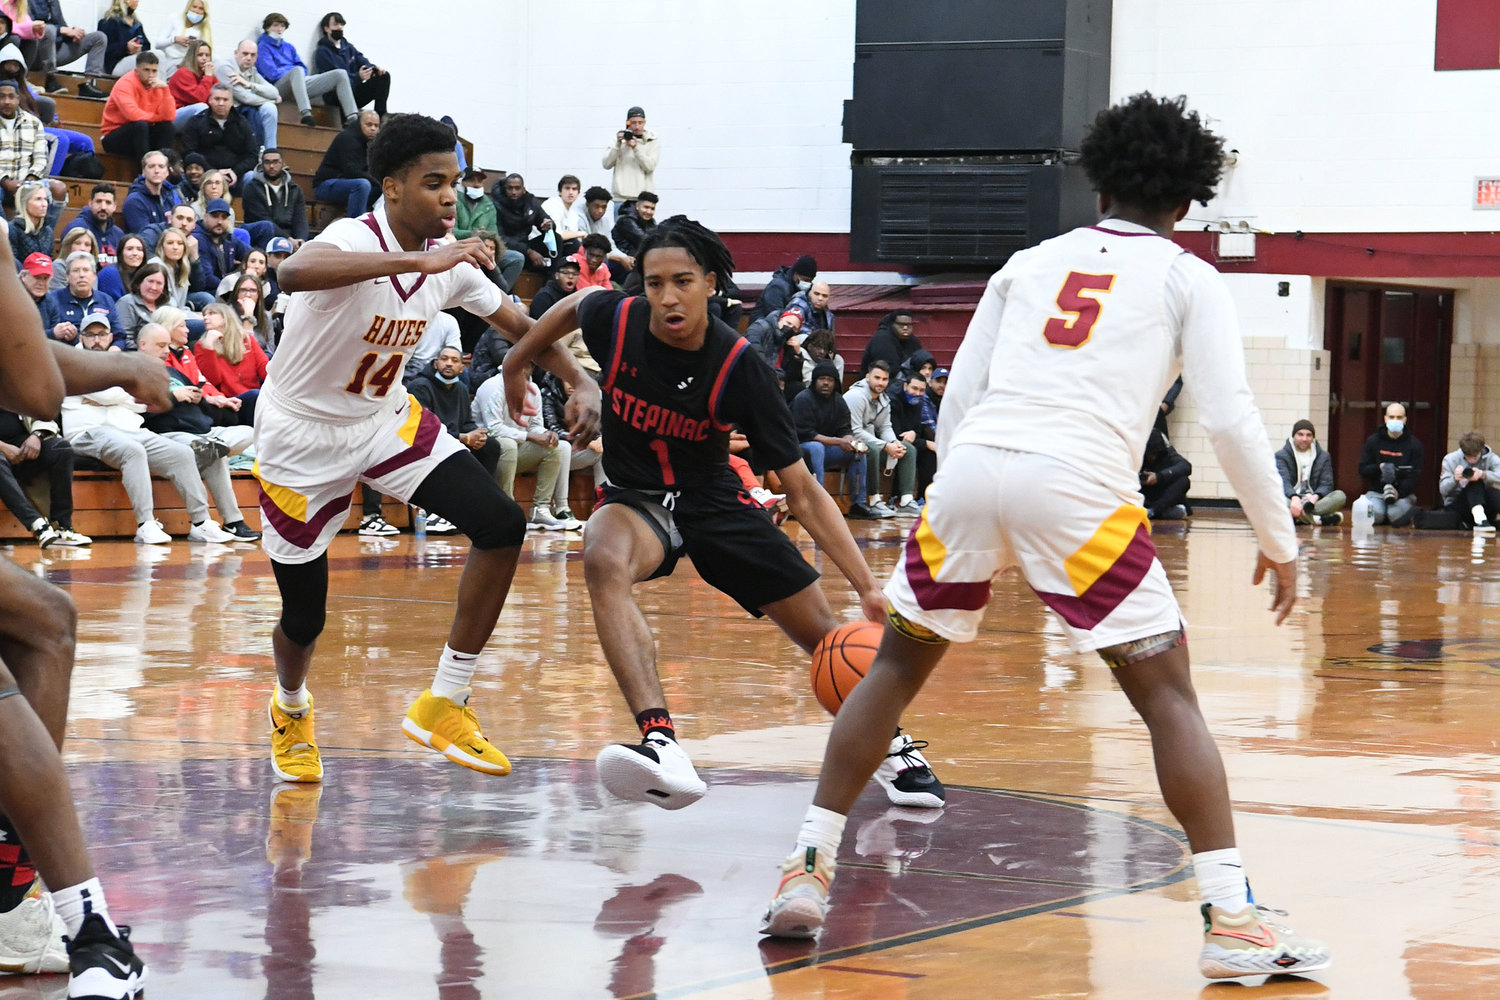 Archbishop Stepinac High School’s Danny Carbuccia dribbles the basketball as Cardinal Hayes’ Tyliek Fields defends during the Archdiocesan boys’ basketball championship game won by Stepinac, 51-40, at Christ the King High School in Queens Feb. 26.